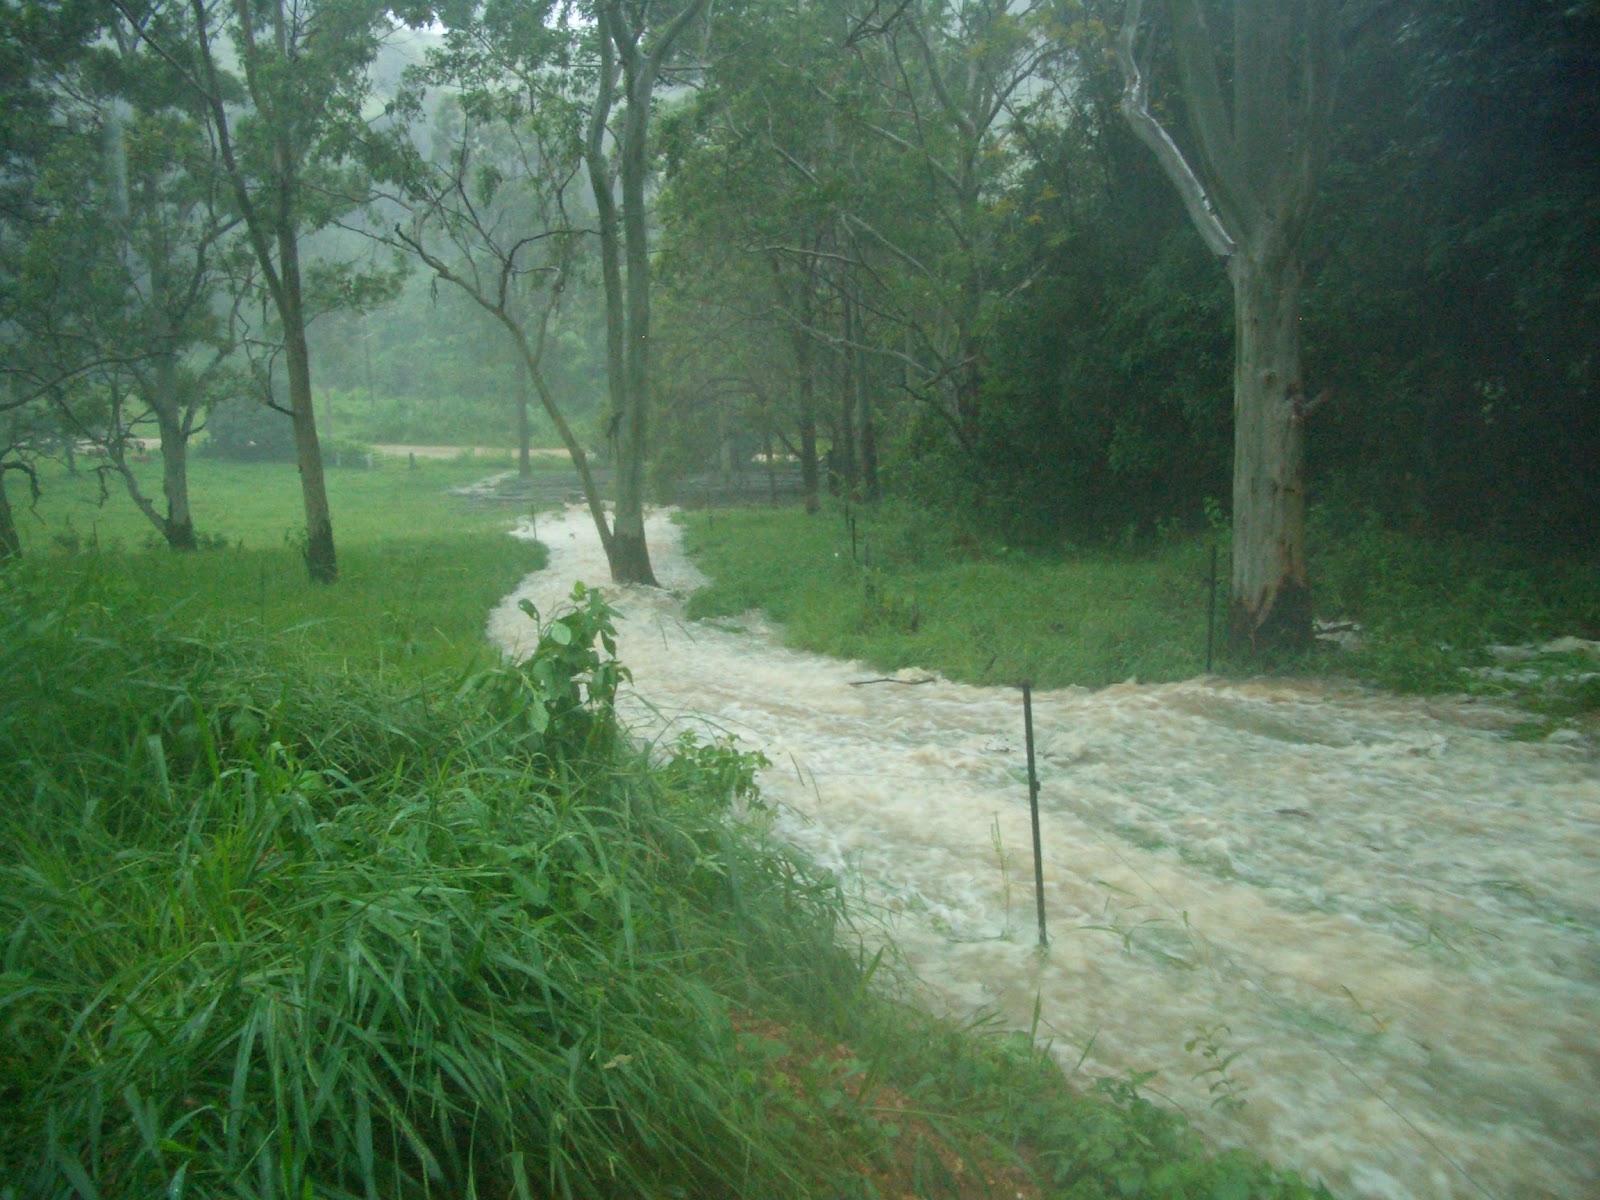 The swale overflow water running  down the hill over the paddock